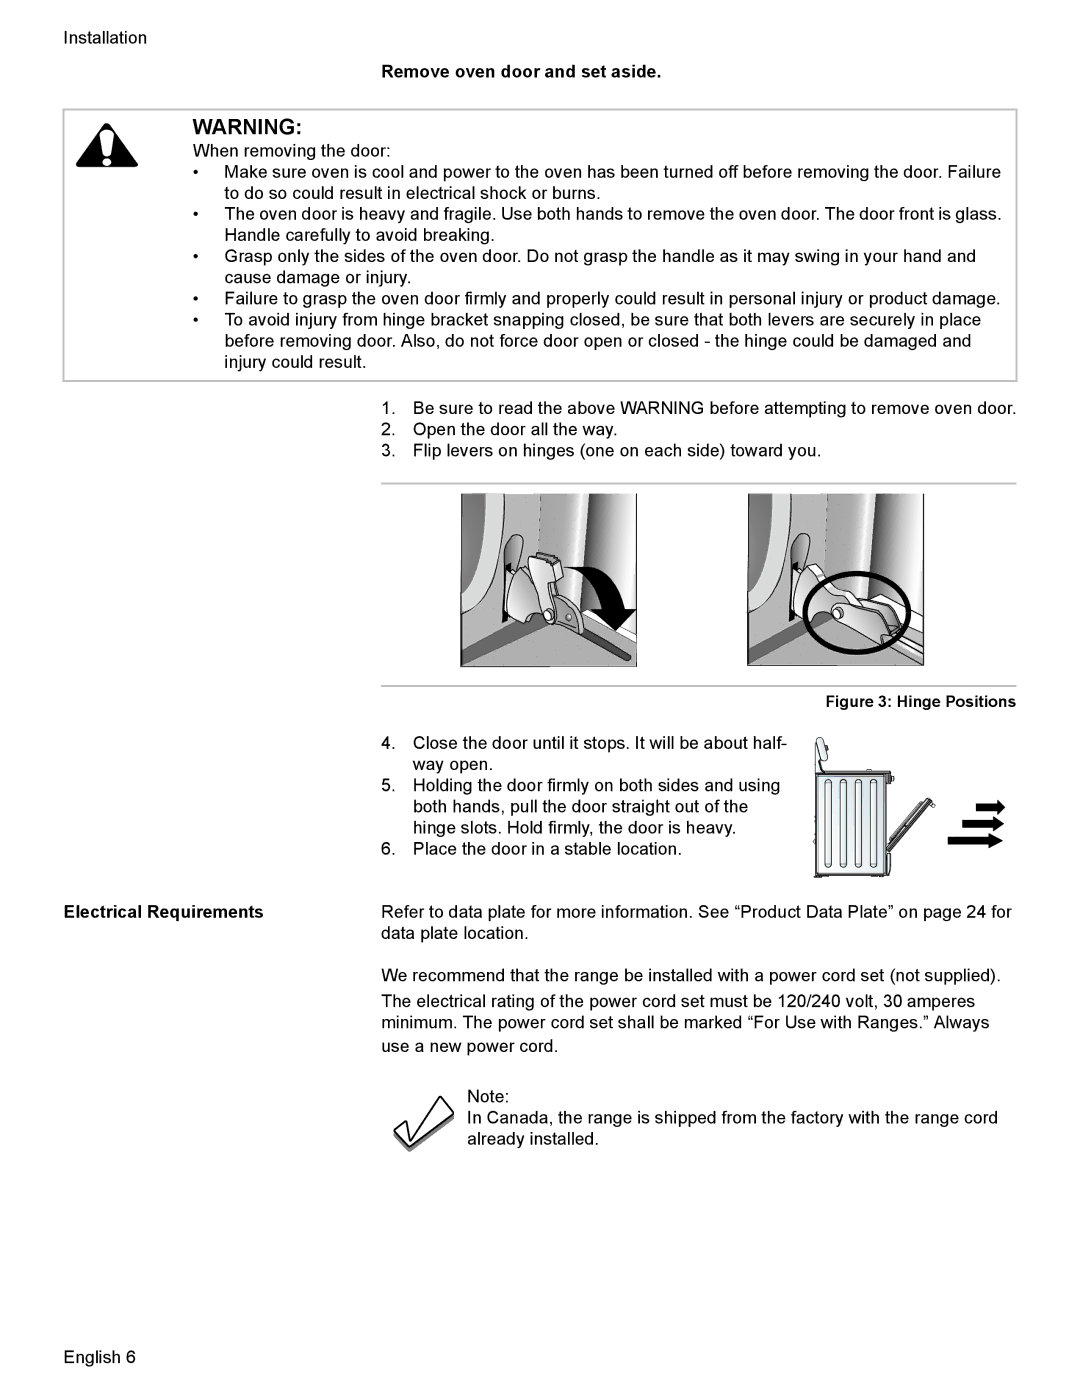 Bosch Appliances Dual-Fuel Slide-In Range installation instructions Remove oven door and set aside, Electrical Requirements 